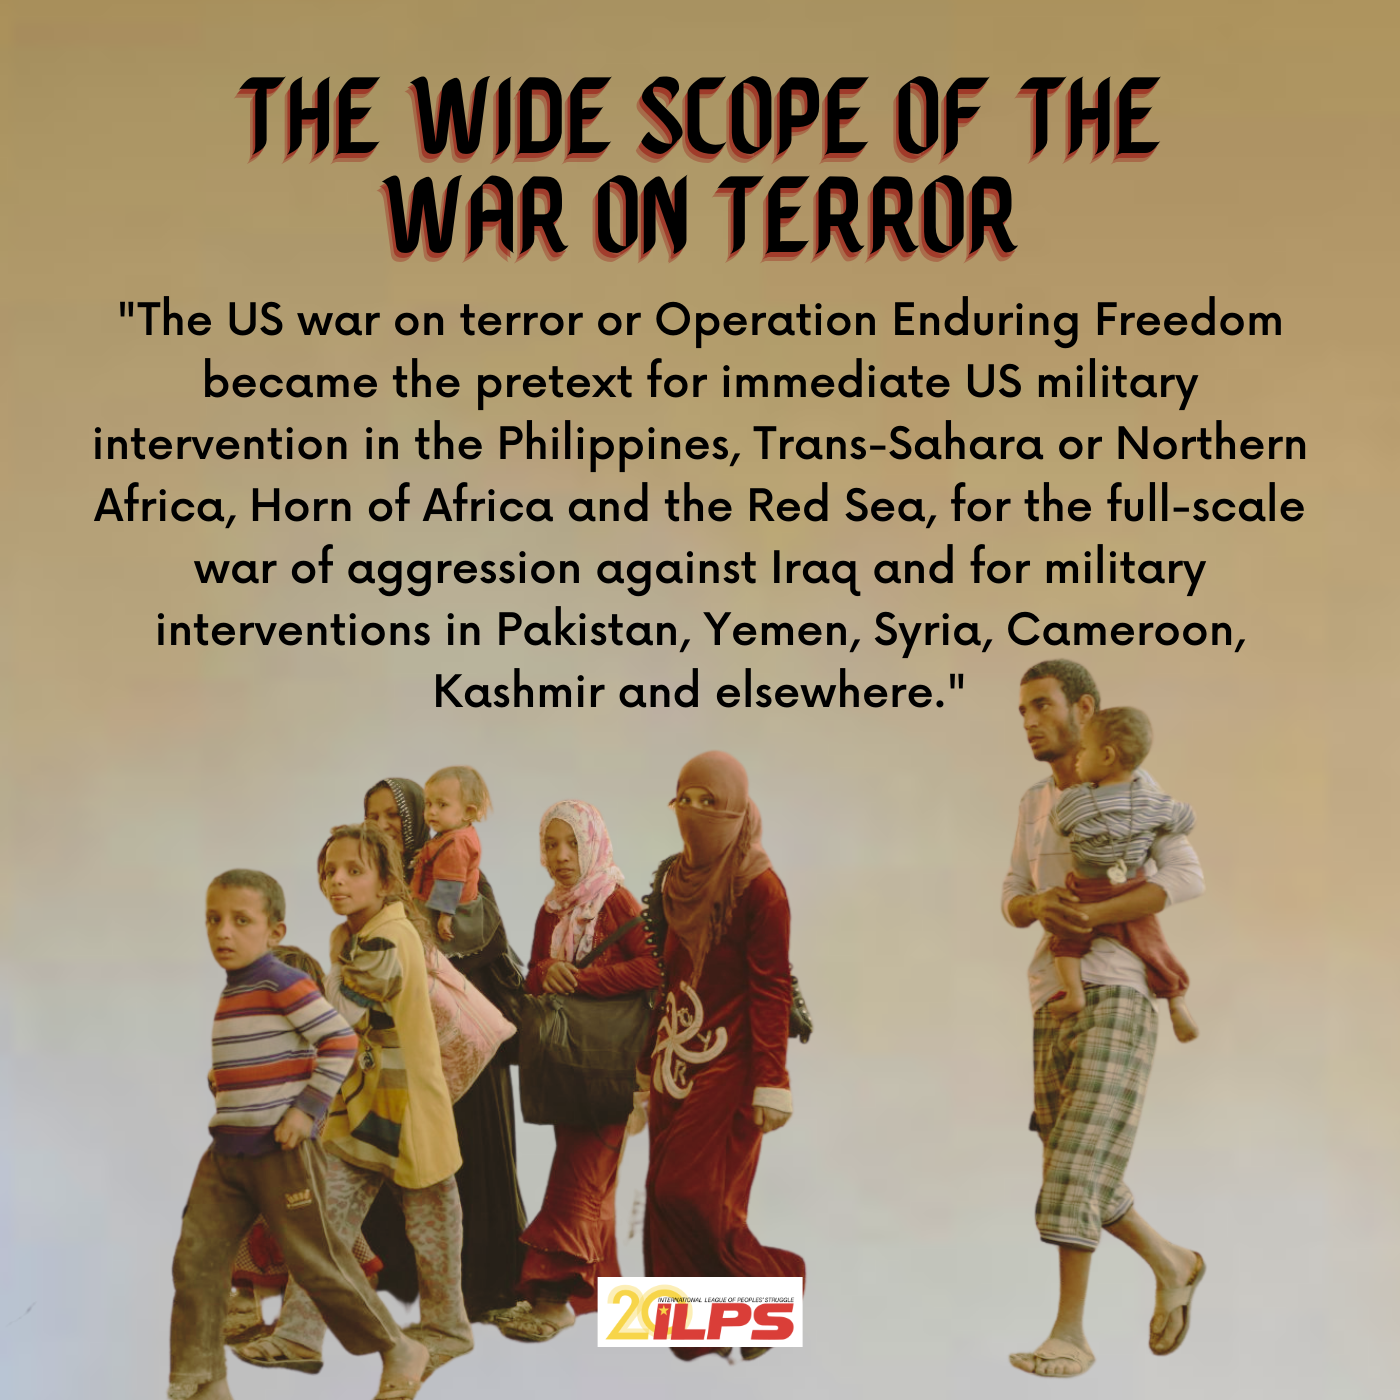 THE WIDE SCOPE OF THE WAR ON TERROR